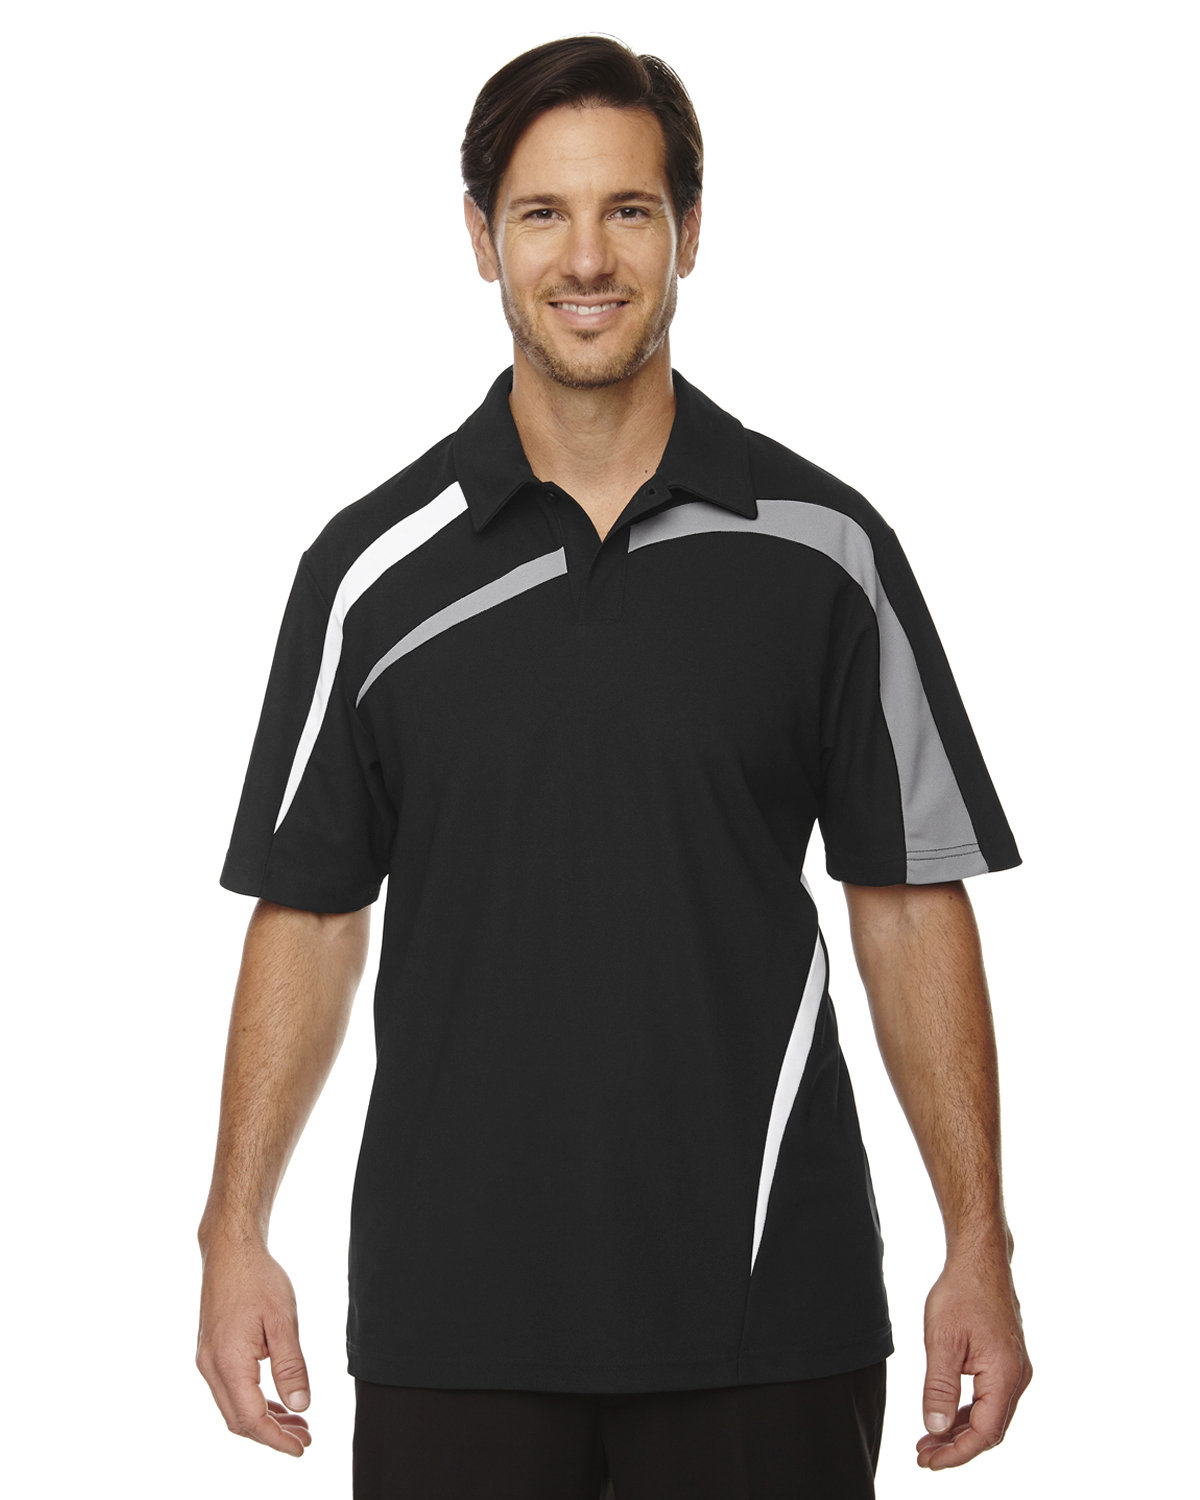 North End 88645 - Men's Impact Performance Polyester Pique Colorblock Polo